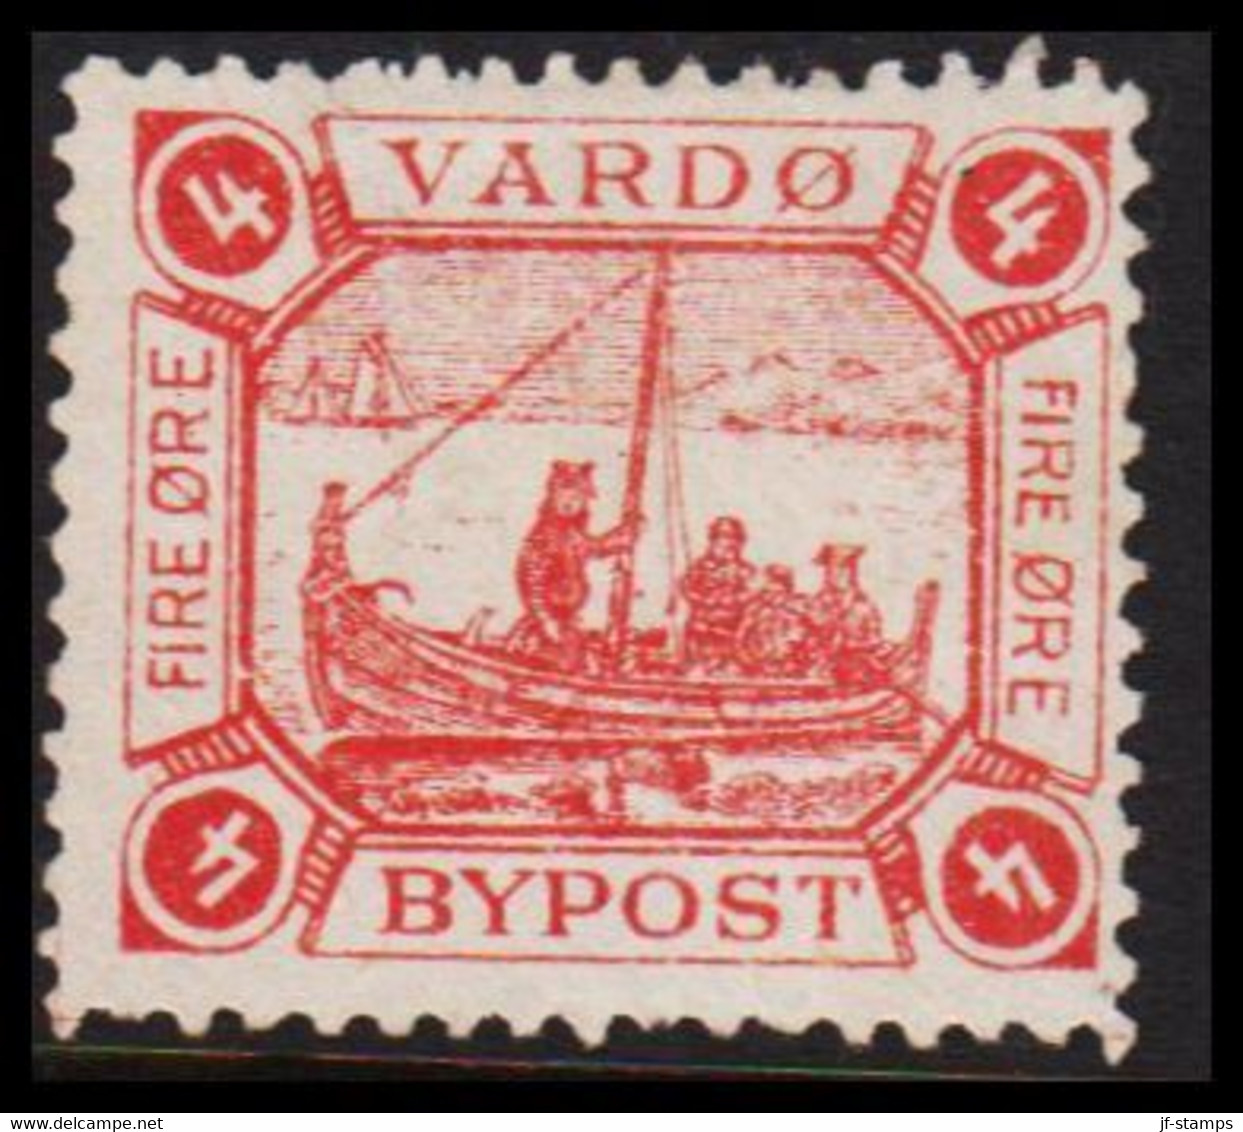 1888. NORGE. VARDØ BYPOST FIRE ØRE. No Gum. Small Fold. - JF529836 - Emissions Locales